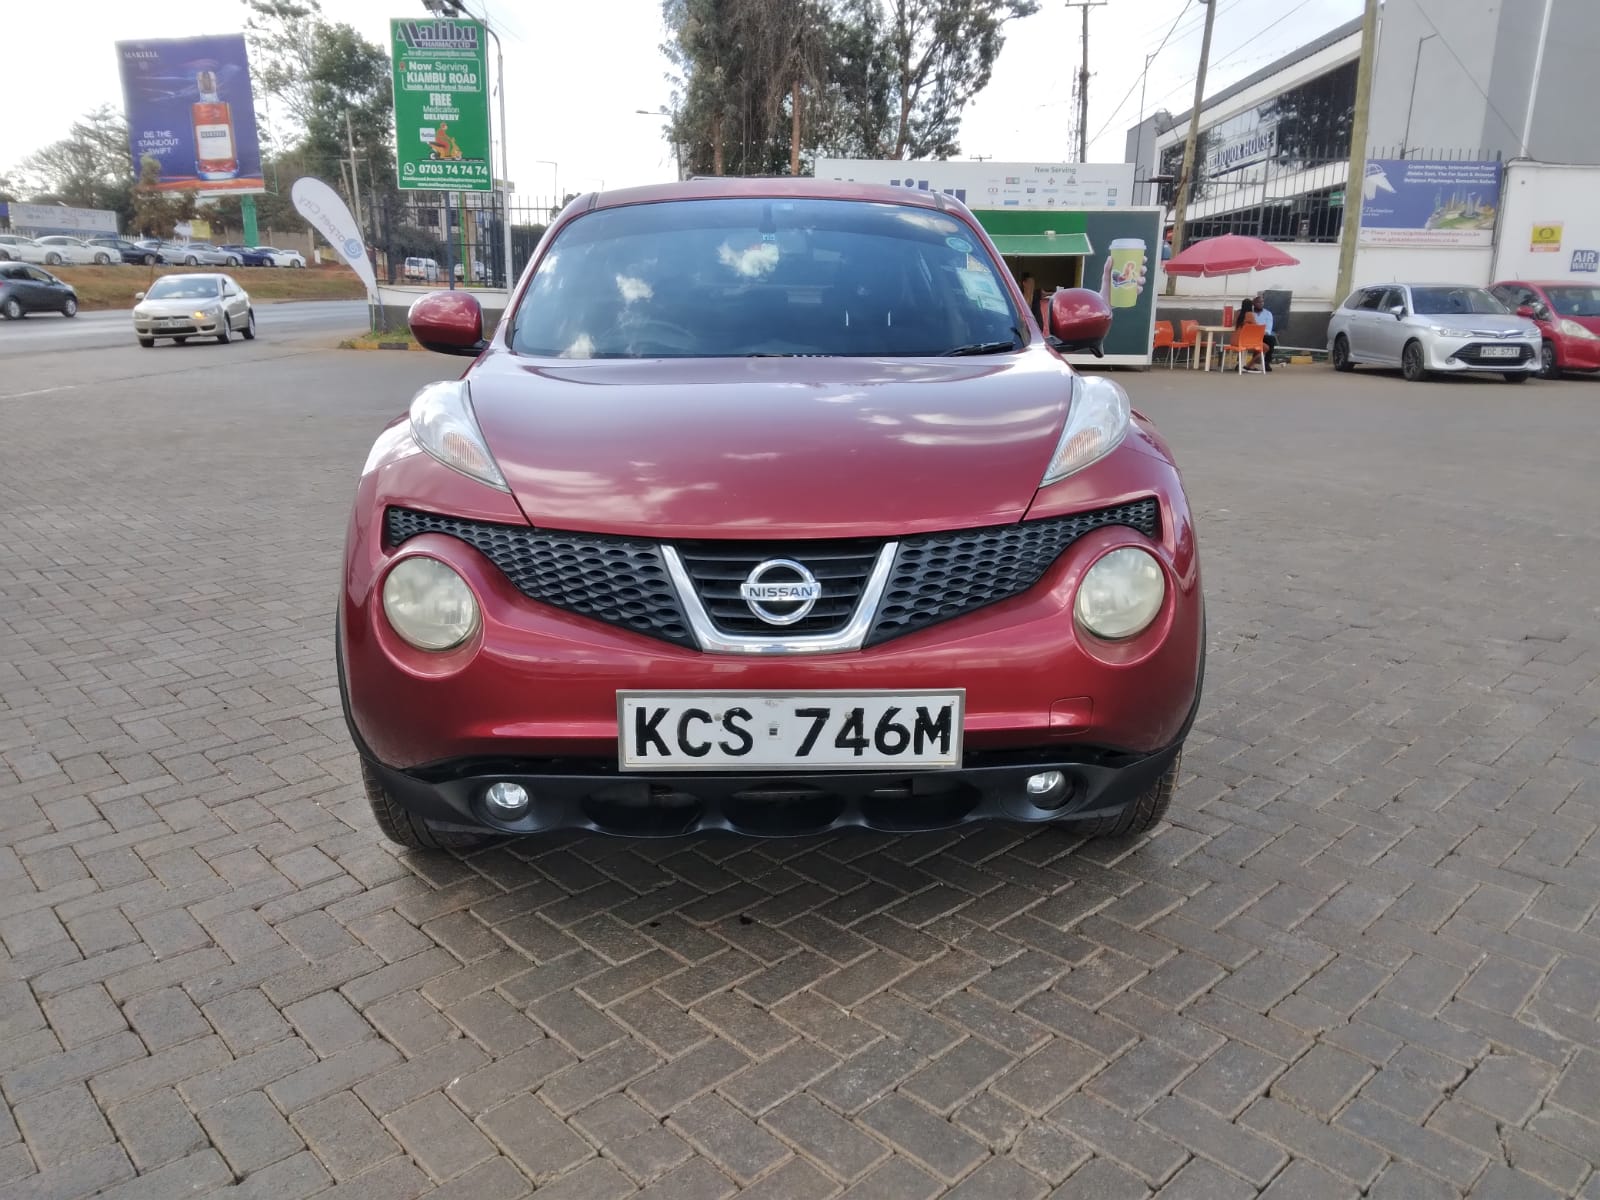 Nissan Juke 2012 You Pay 20% Deposit Trade in Ok Wow! Wine Red